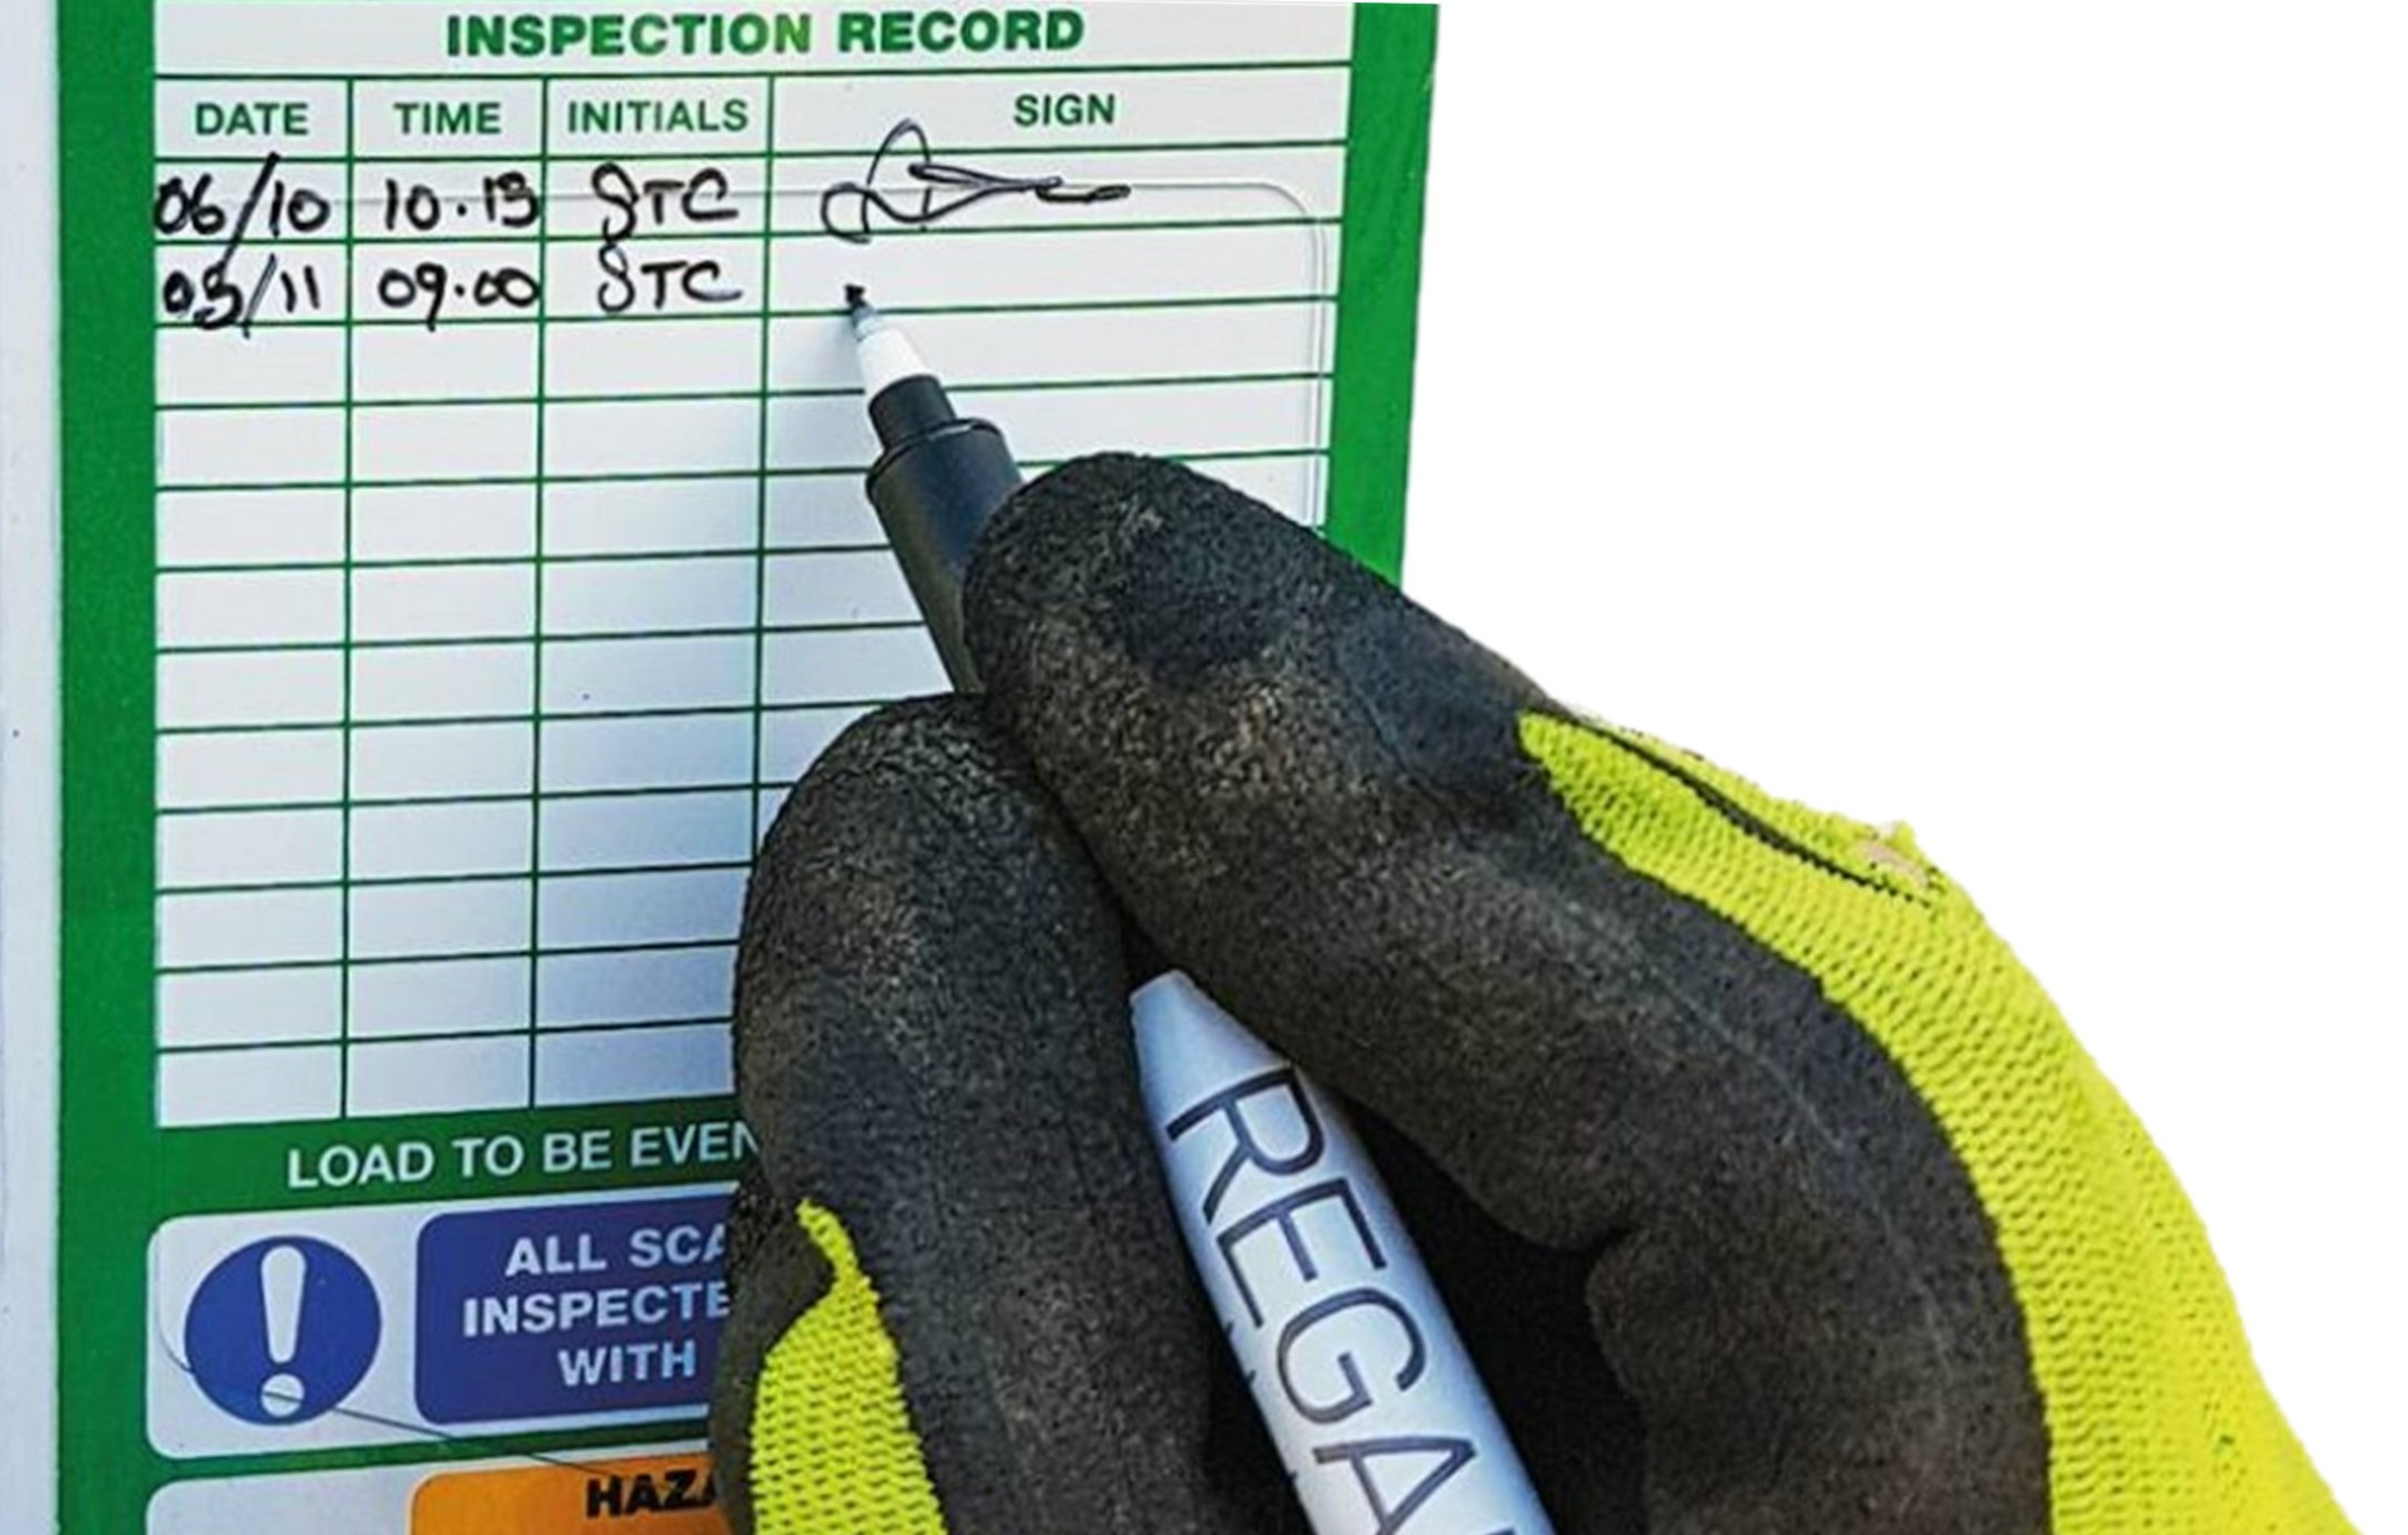 5 Commonly Overlooked Areas of Inspection Tagging: Ensuring Workplace Safety